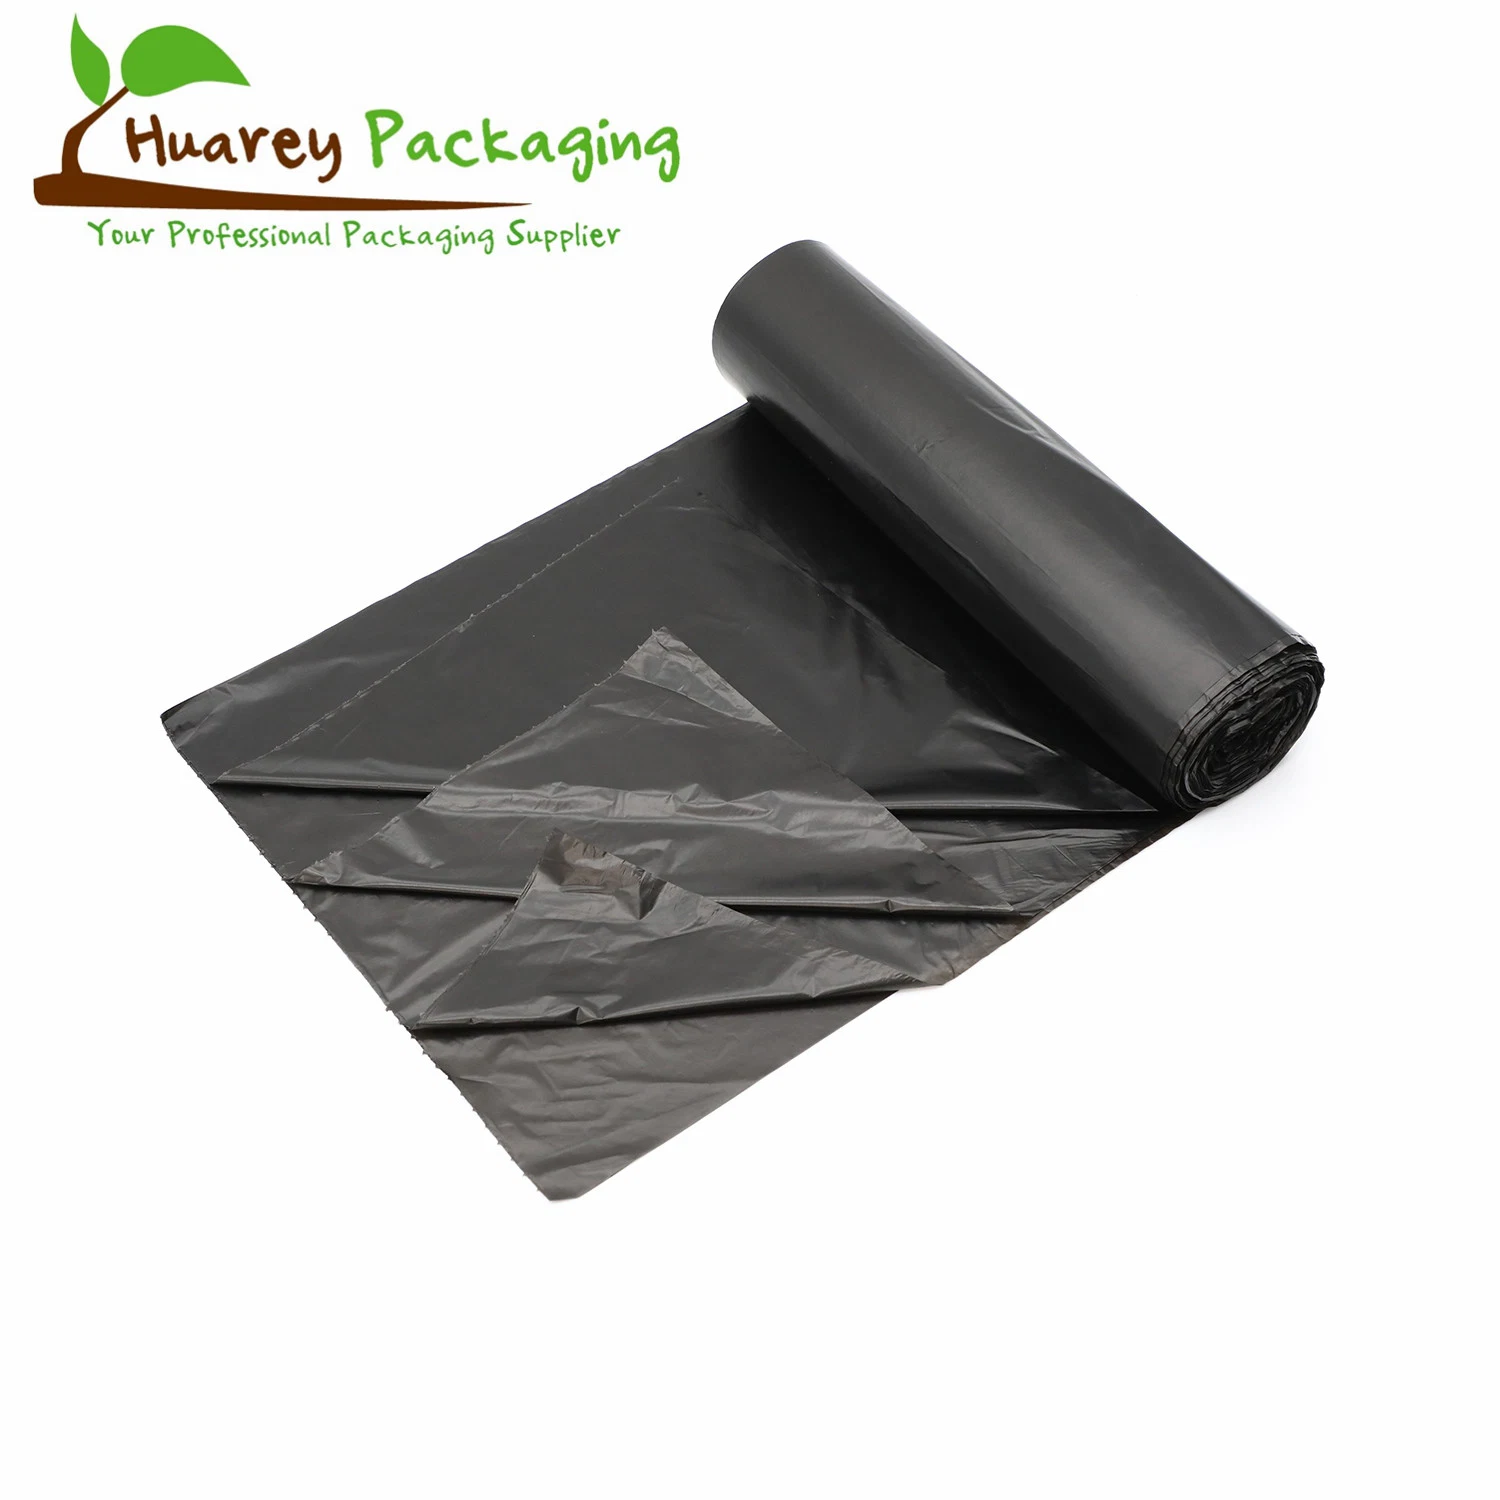 HDPE/LDPE Water-Proof Garbage Bag for Daily Use